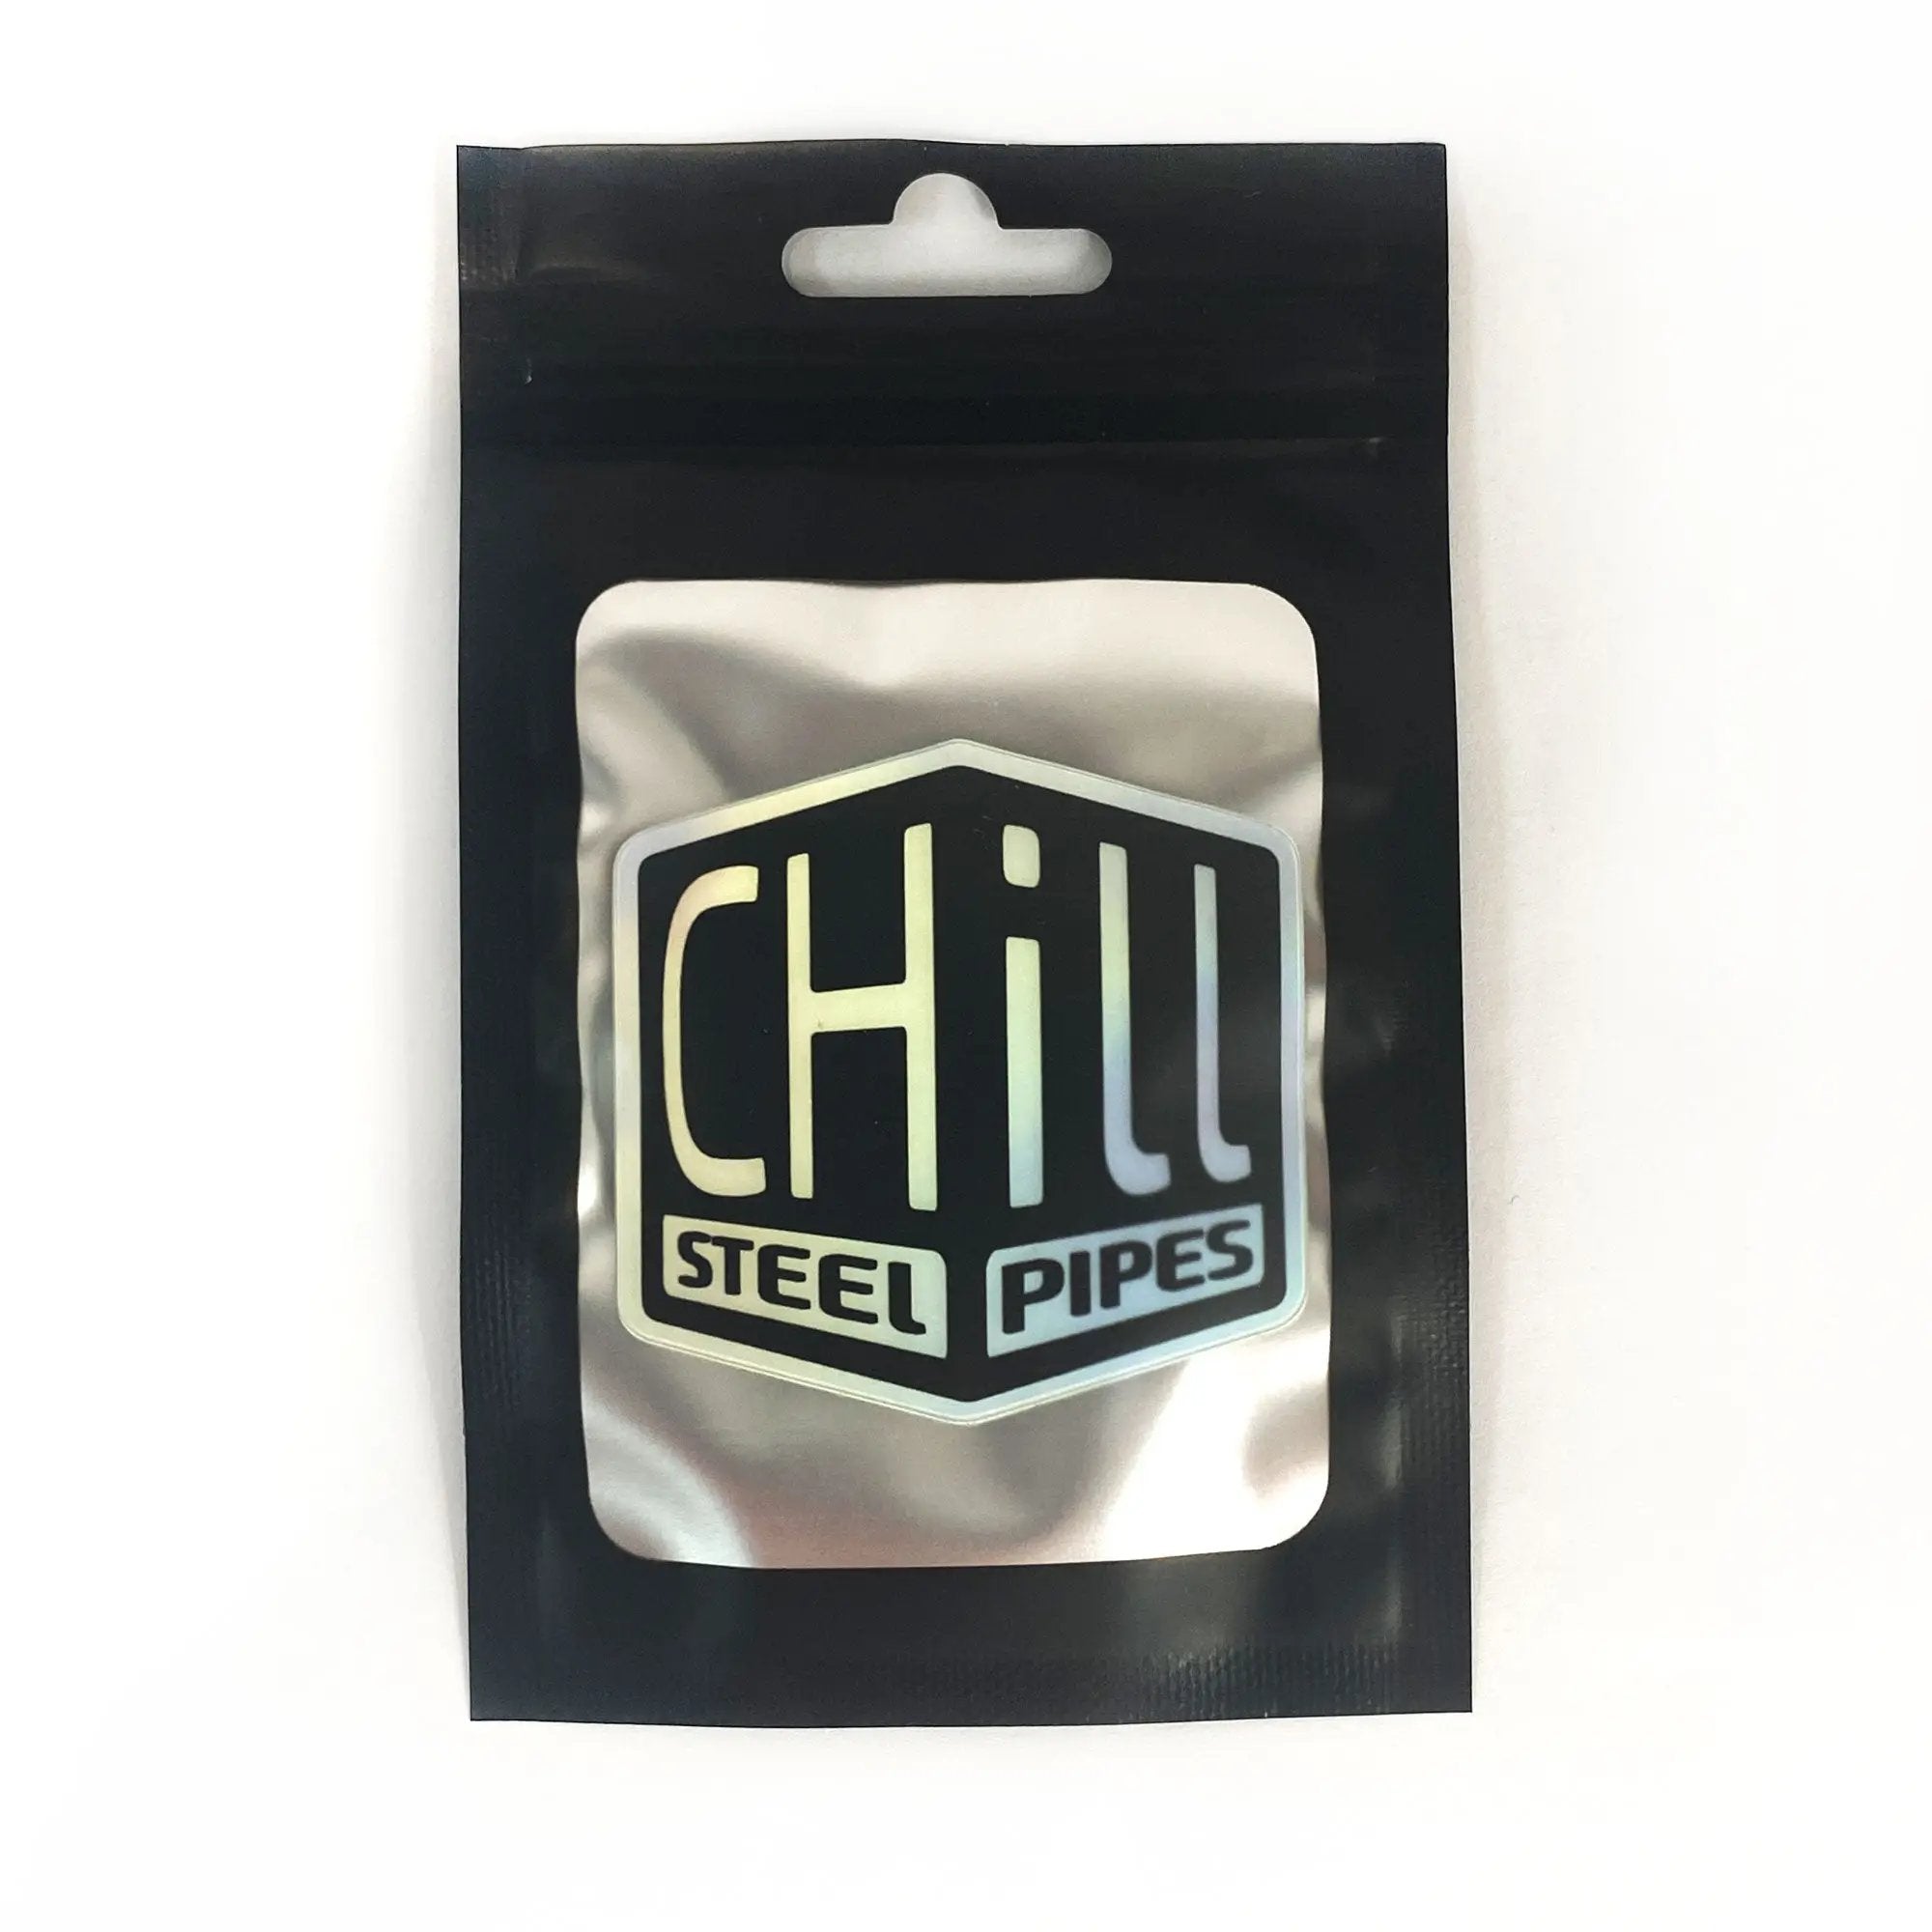 Chill - Downstem & Neckpiece Gasket Replacement Kit by Chill Steel Pipes